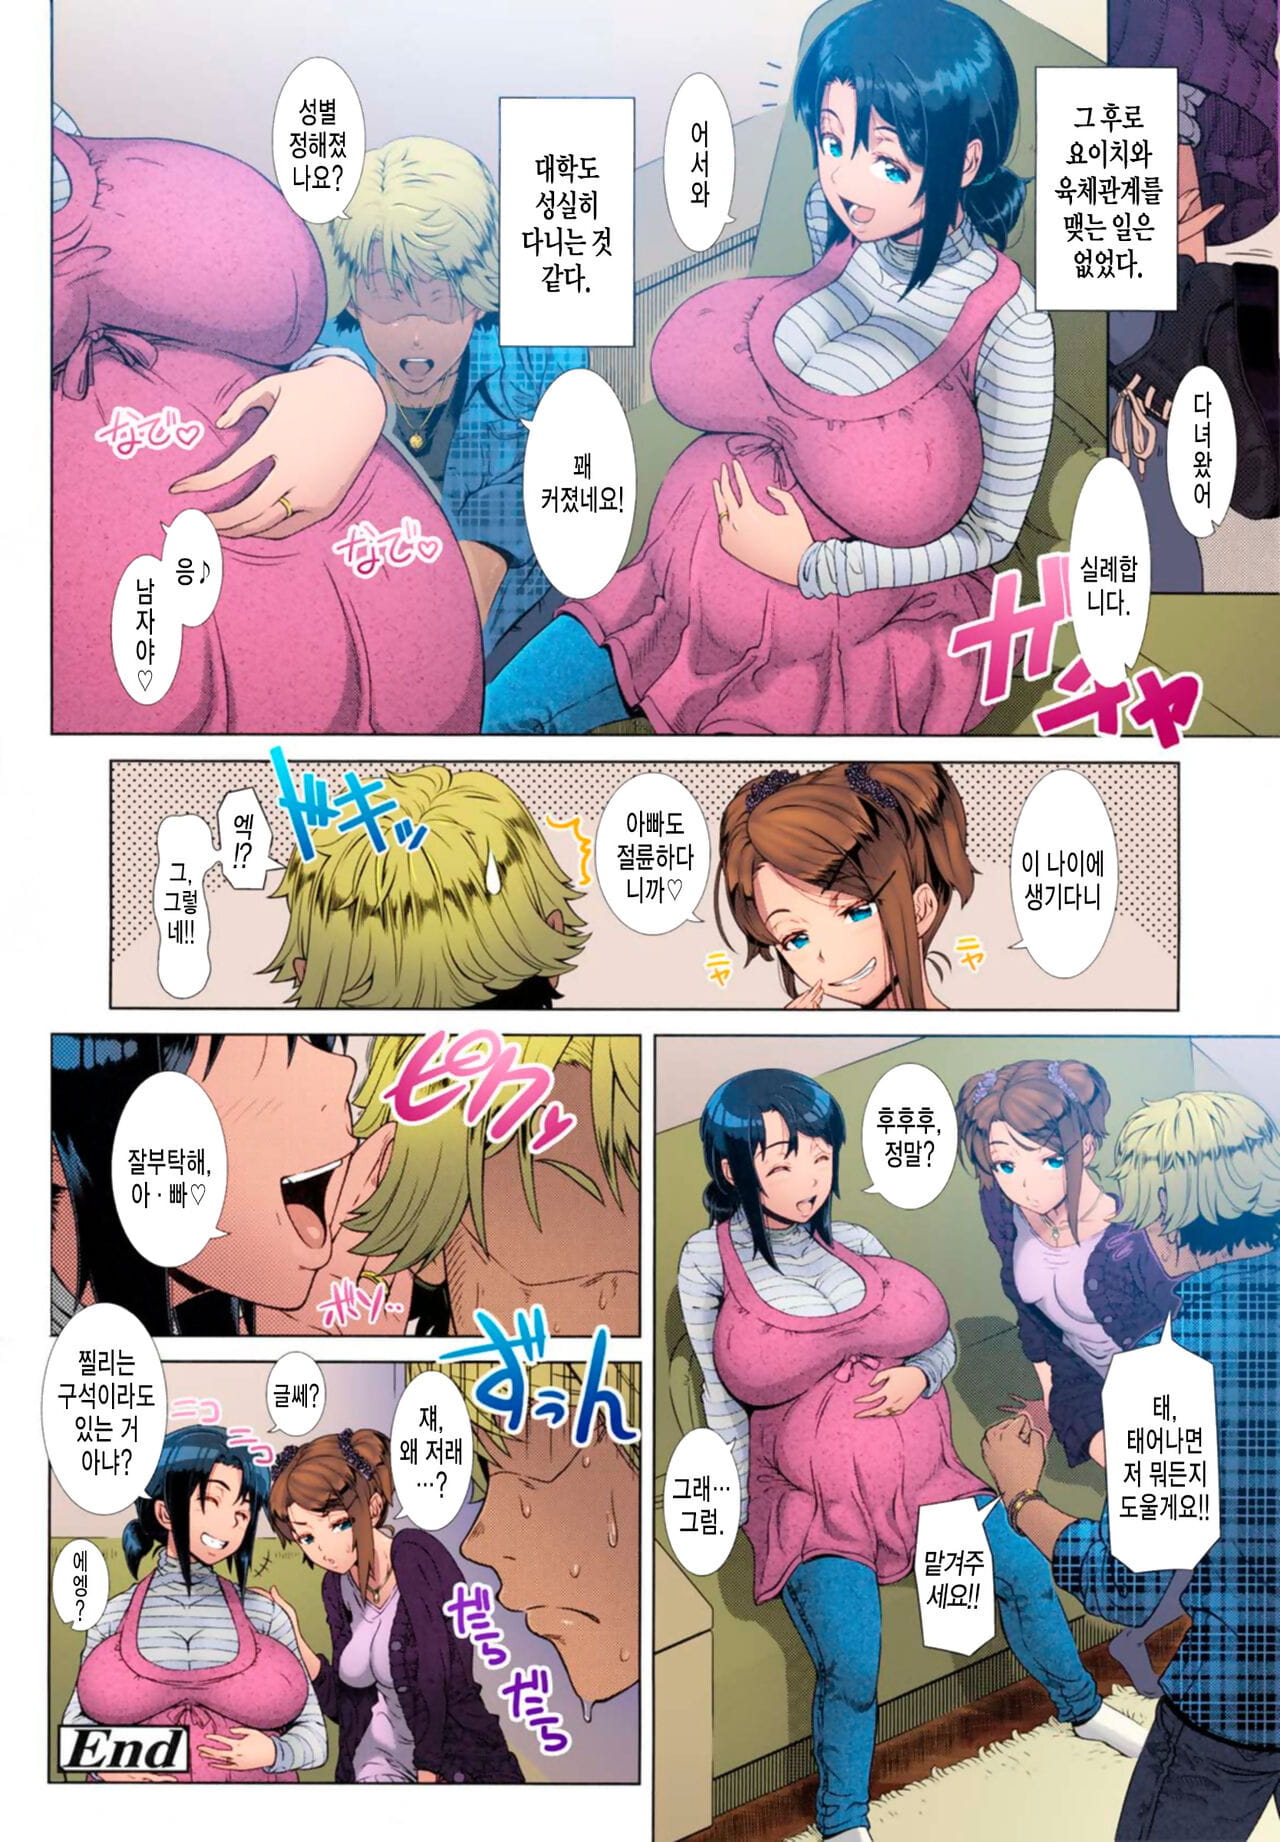 Hitozuma Life One time gal COLOR Ch.1-2 - part 2 page 1